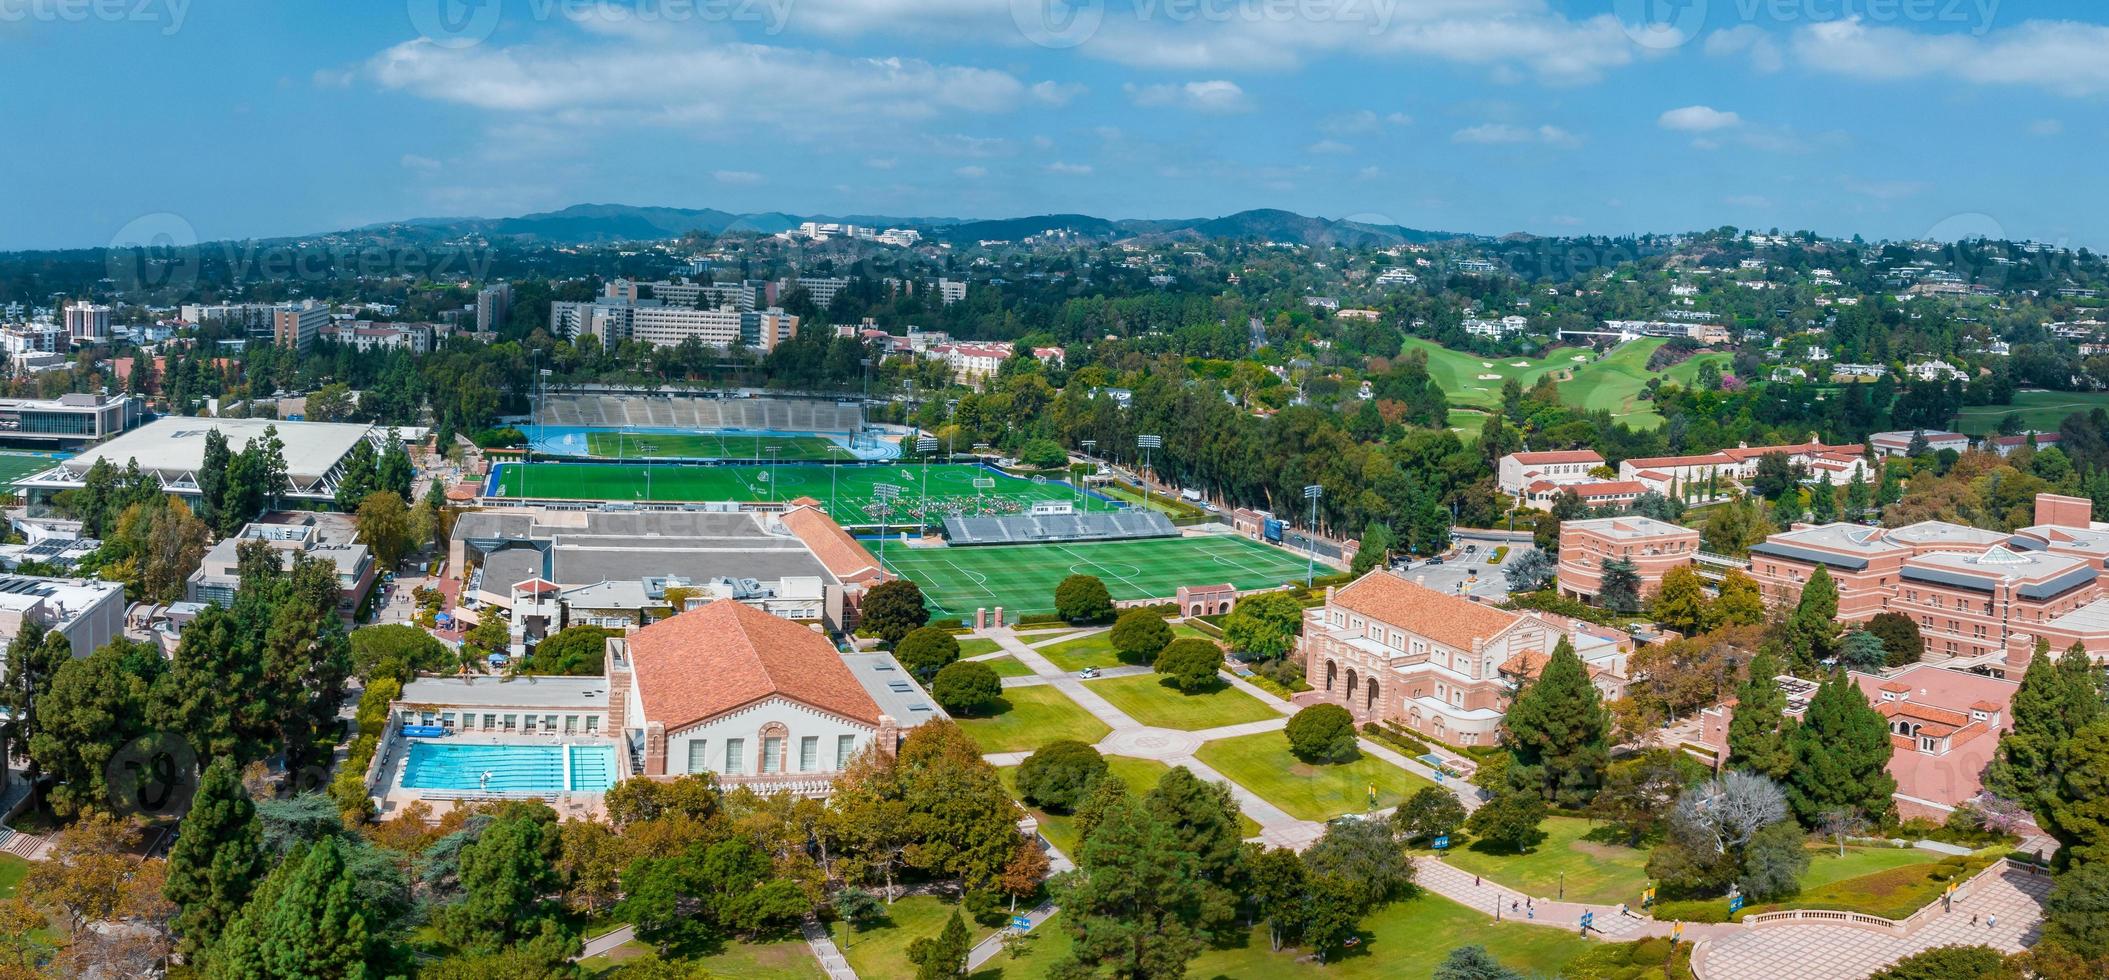 Aerial view of the Football stadium at the University of California, Los Angeles photo